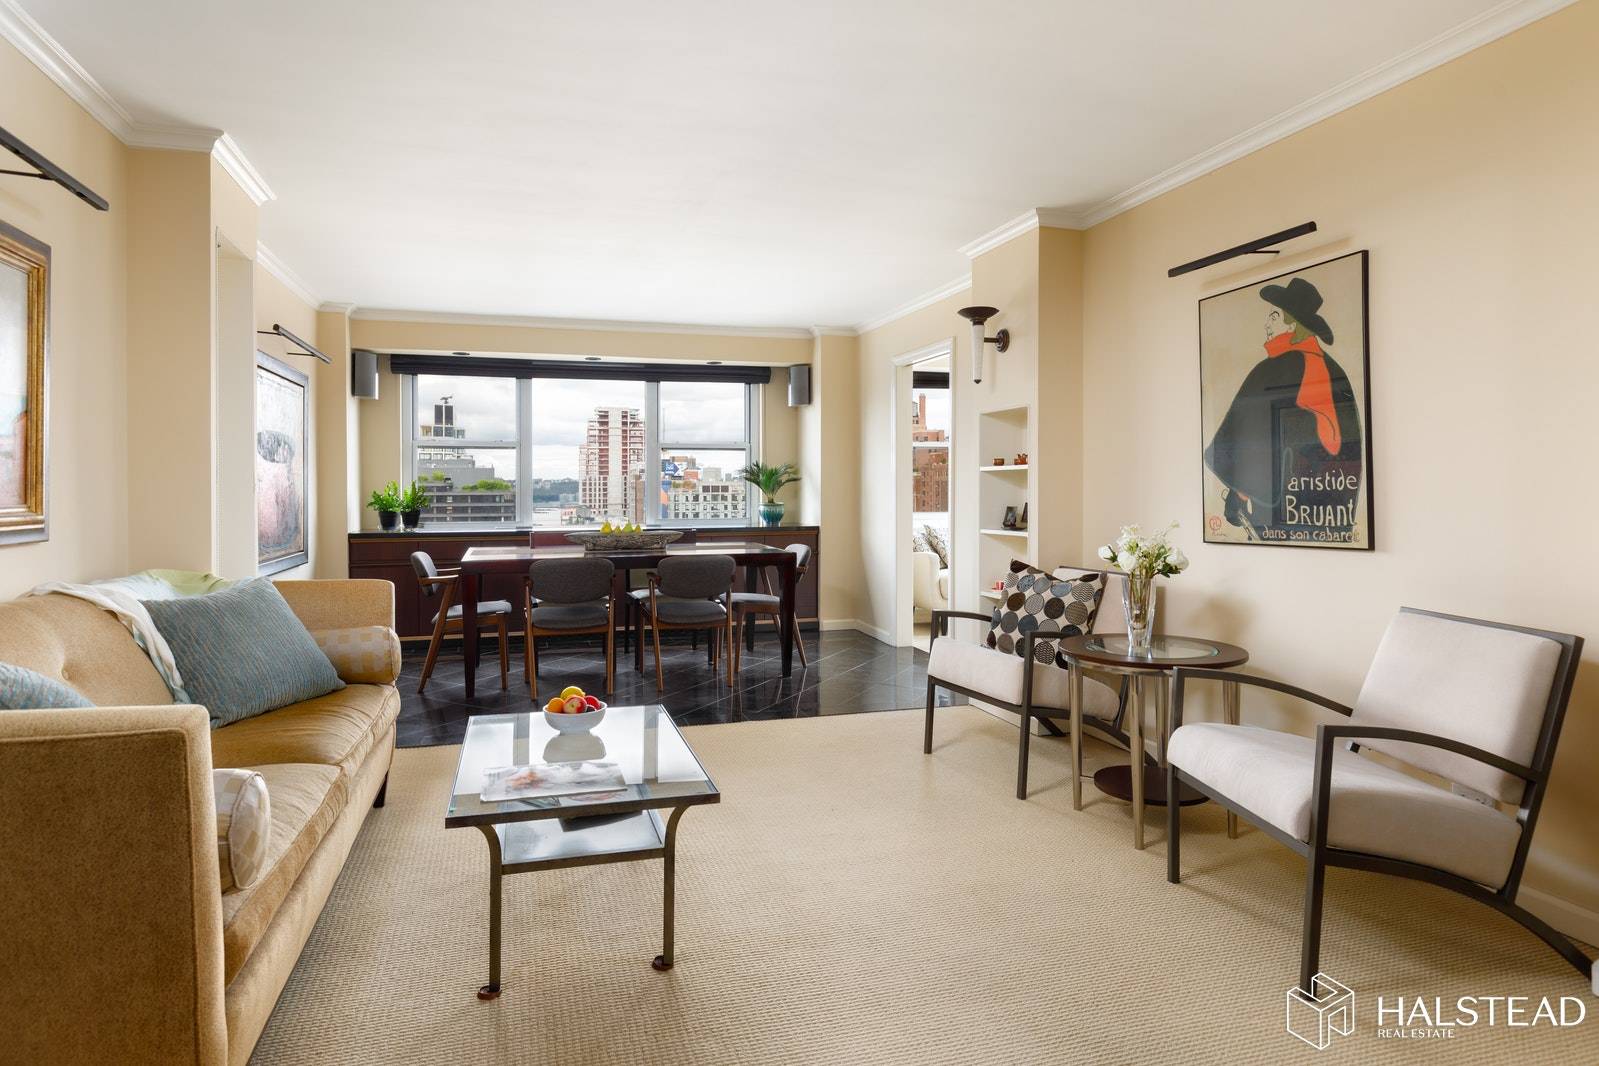 You'll love working from home and creating meals while enjoying some of the most coveted views in NYC !